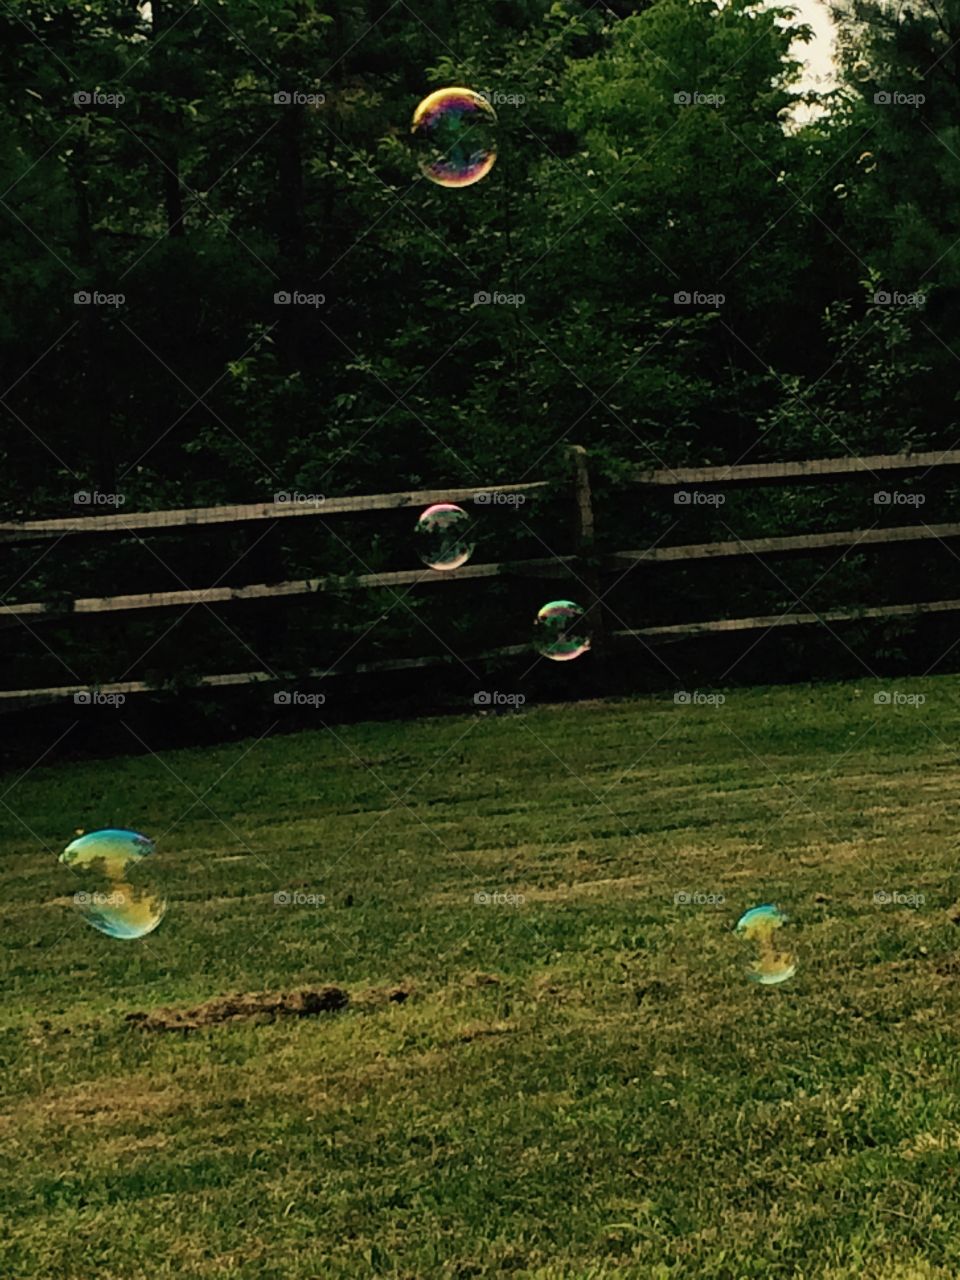 Bubbles in the summer . Fun day with friends. Bubbles were blown 